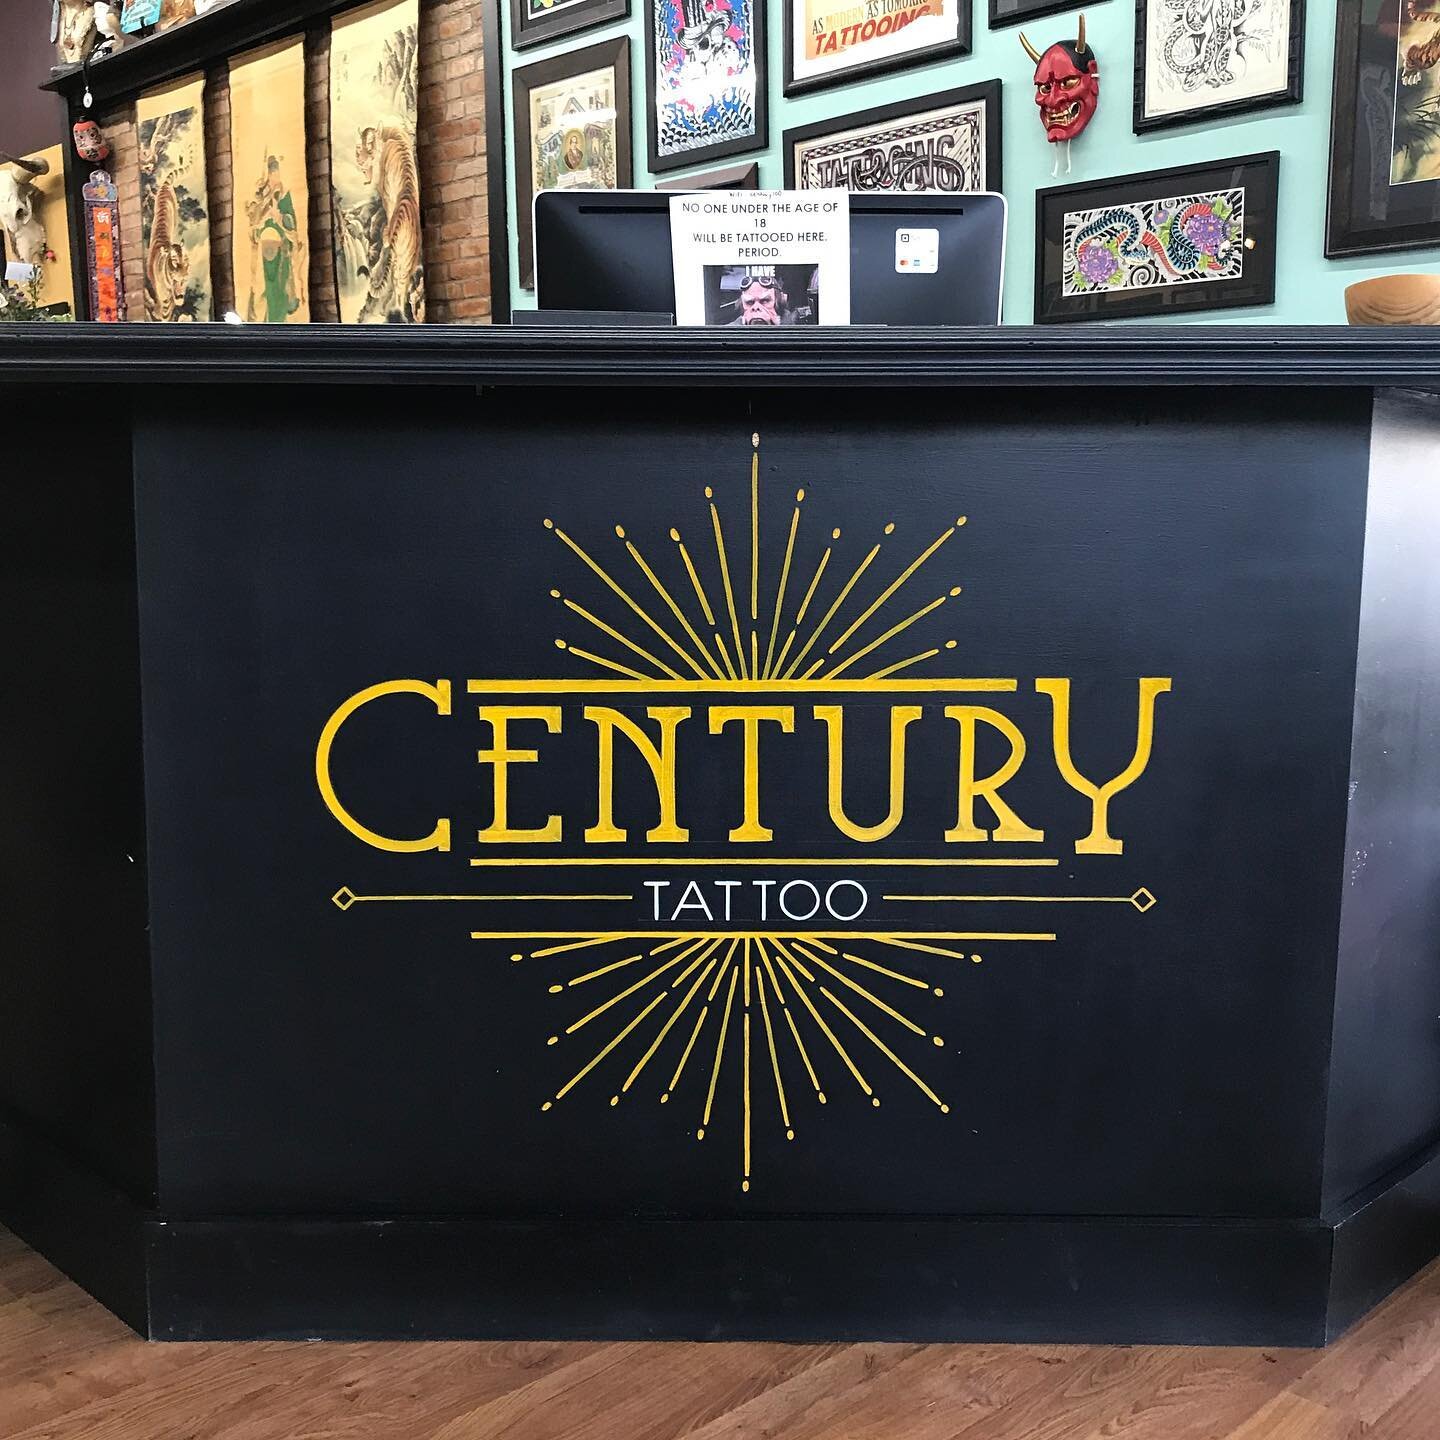 Had fun painting @century.tattoo yesterday. Go check em out in Ashland, MO 

#stlsignandmural #handpainted #signs #lettering #signwriting #centurytattoo #ashlandmo #tattooshop